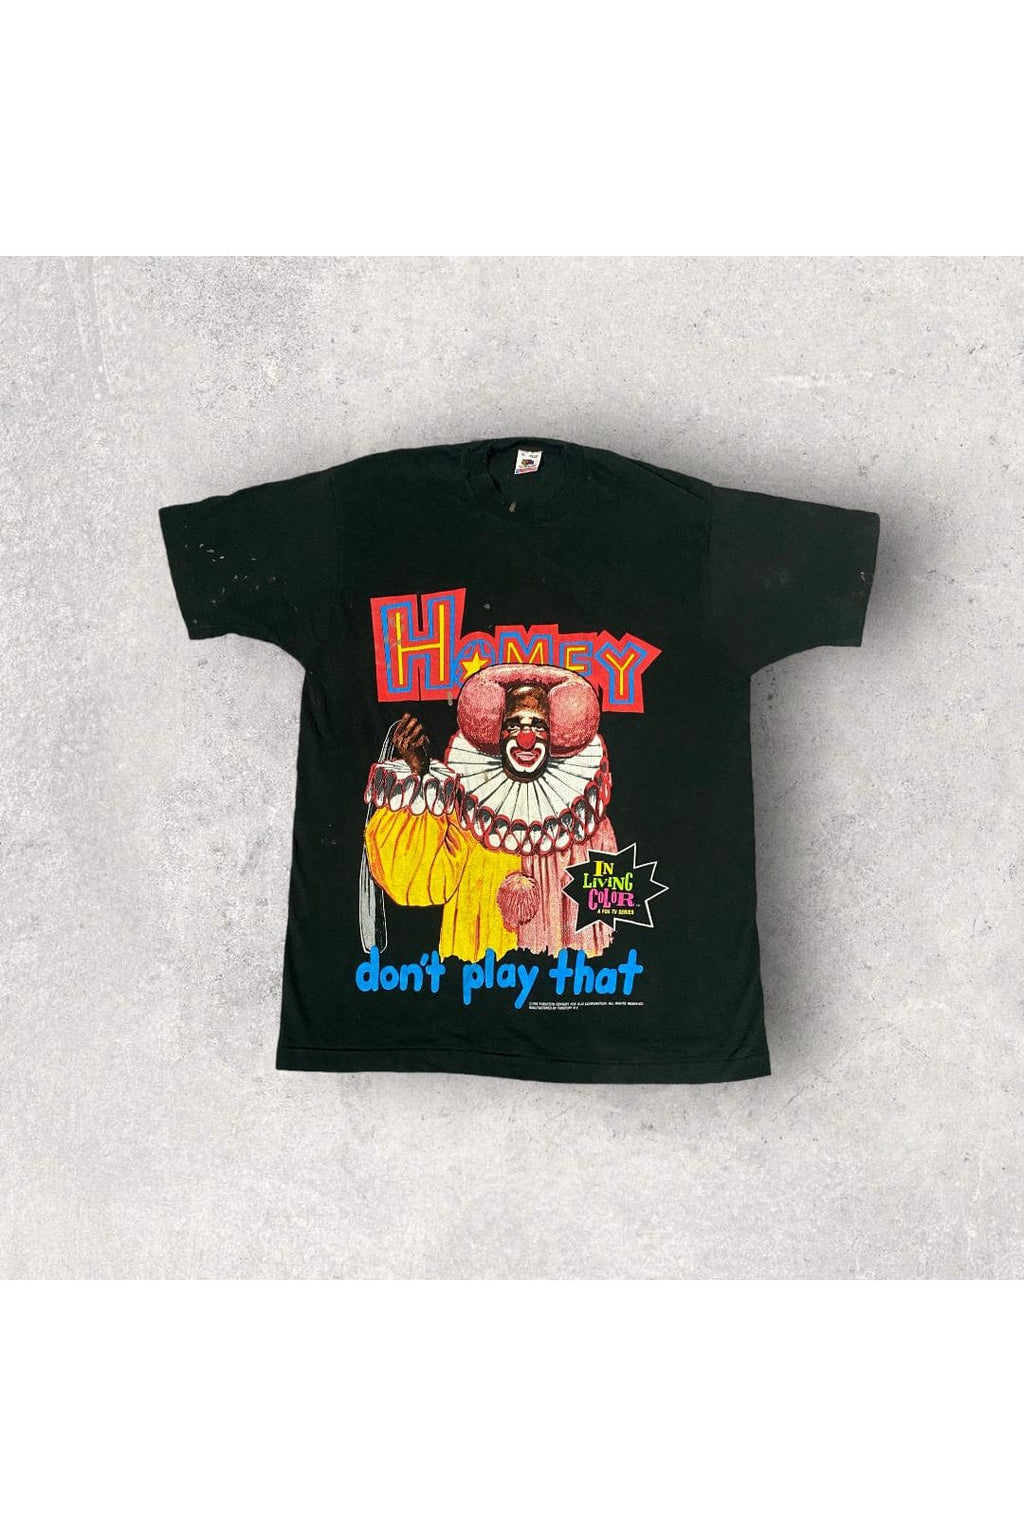 Vintage 1990 Homey Don't Play That In Living Color Homey The Clown Promo Tee- XL